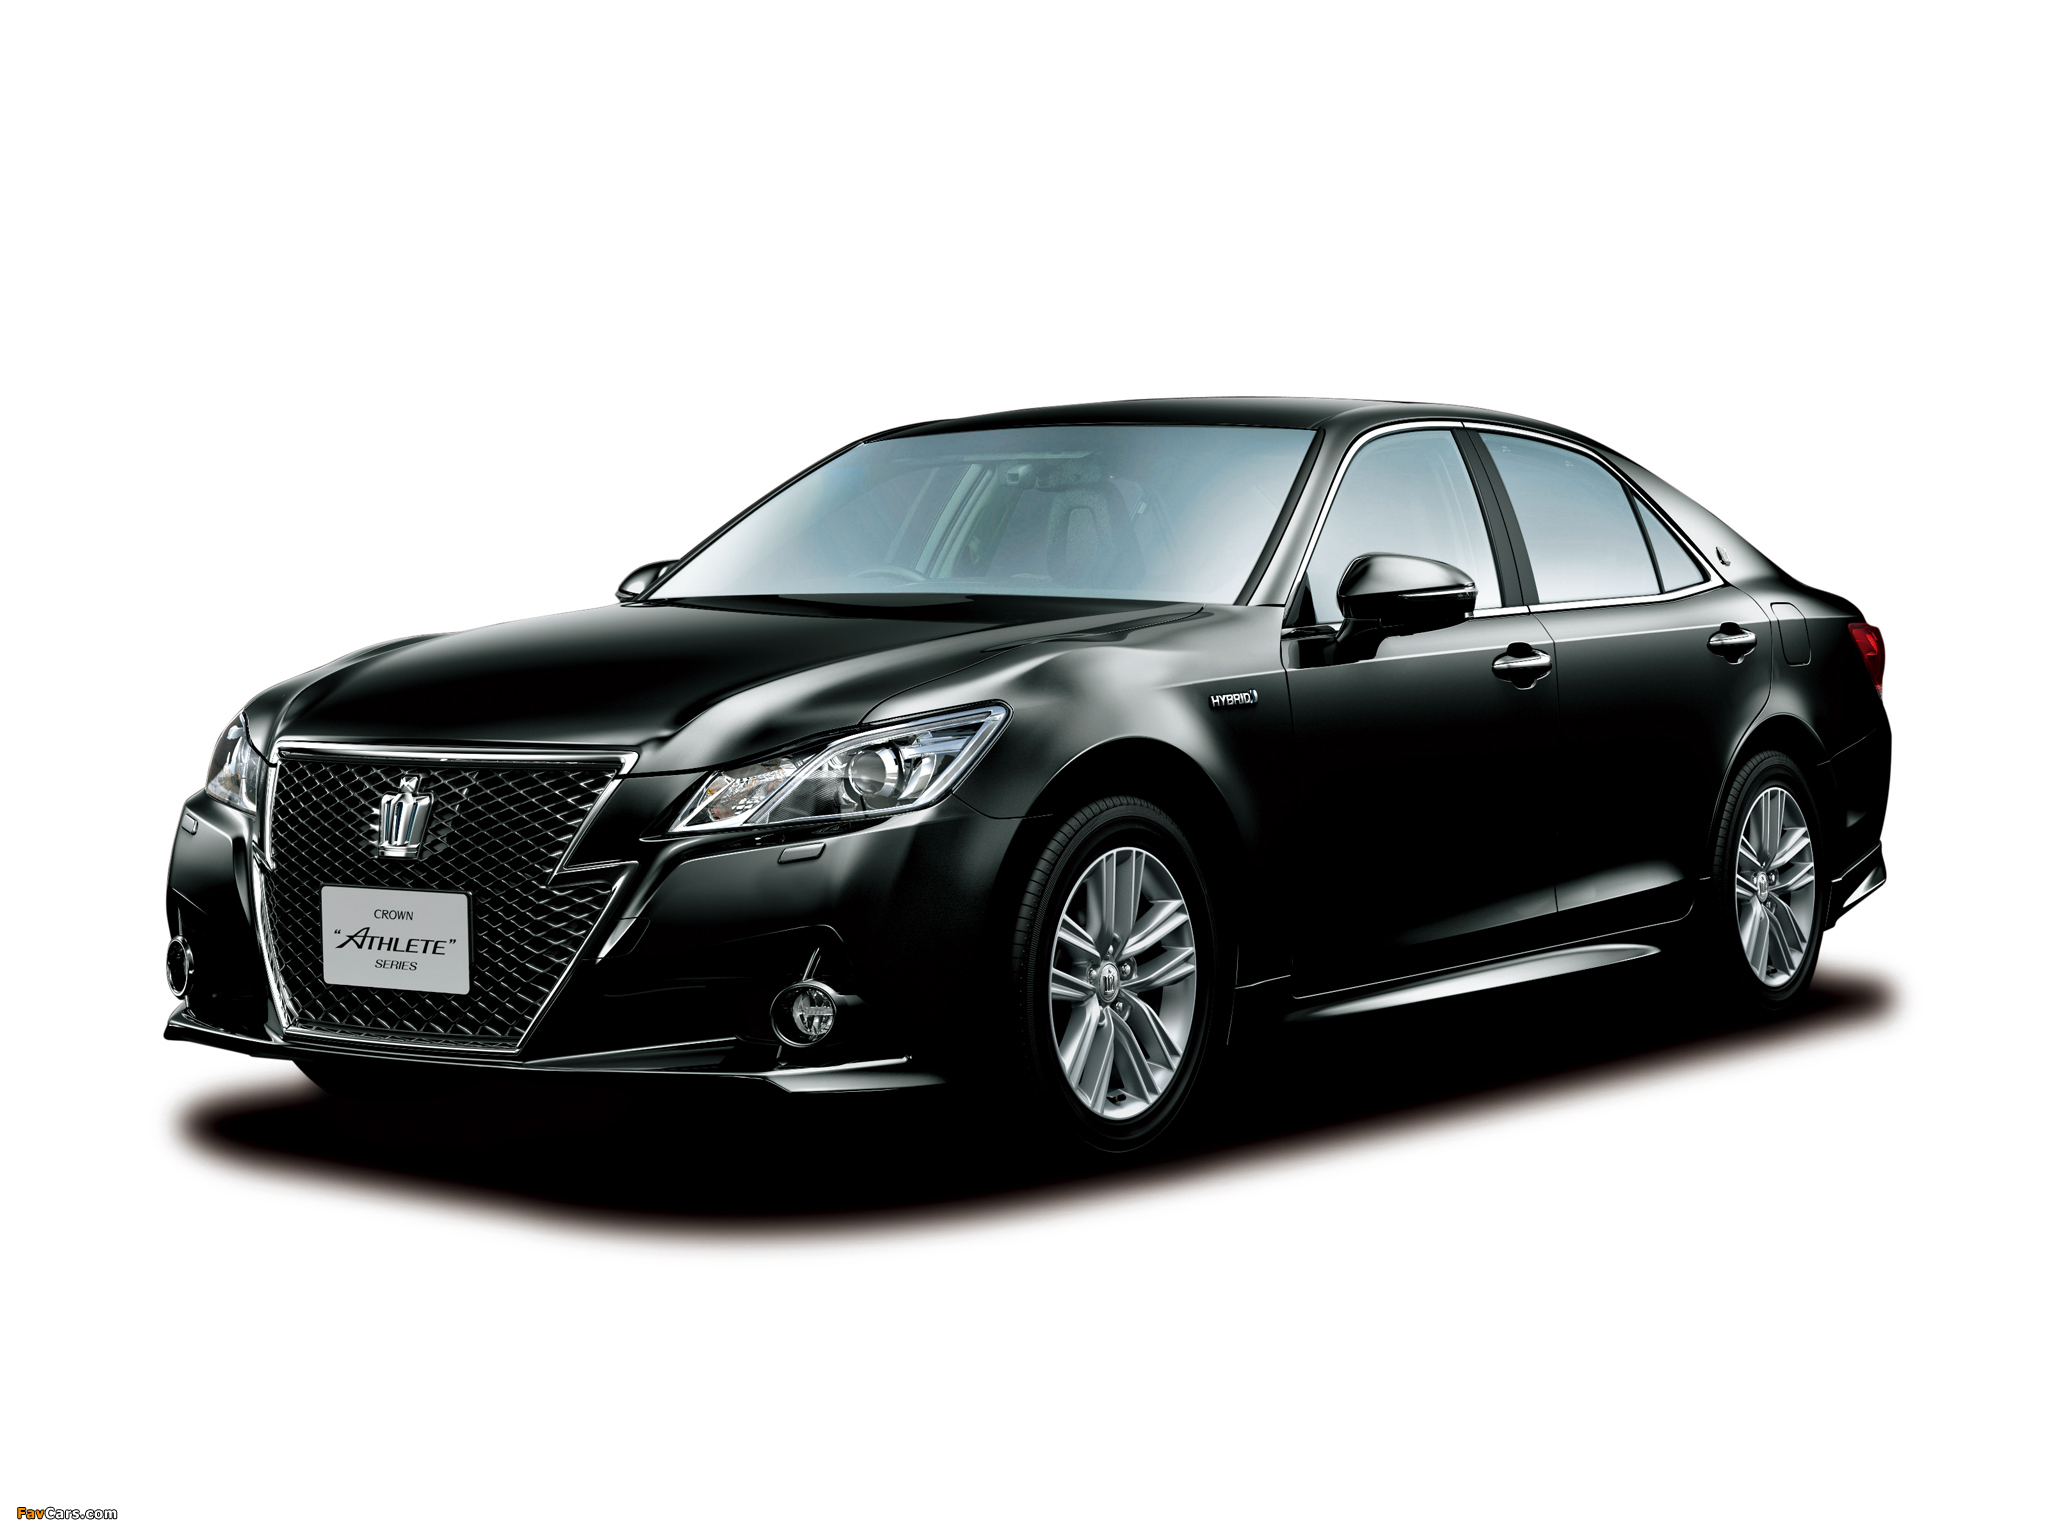 Toyota Crown Hybrid Athlete (S210) 2012 wallpapers (2048 x 1536)